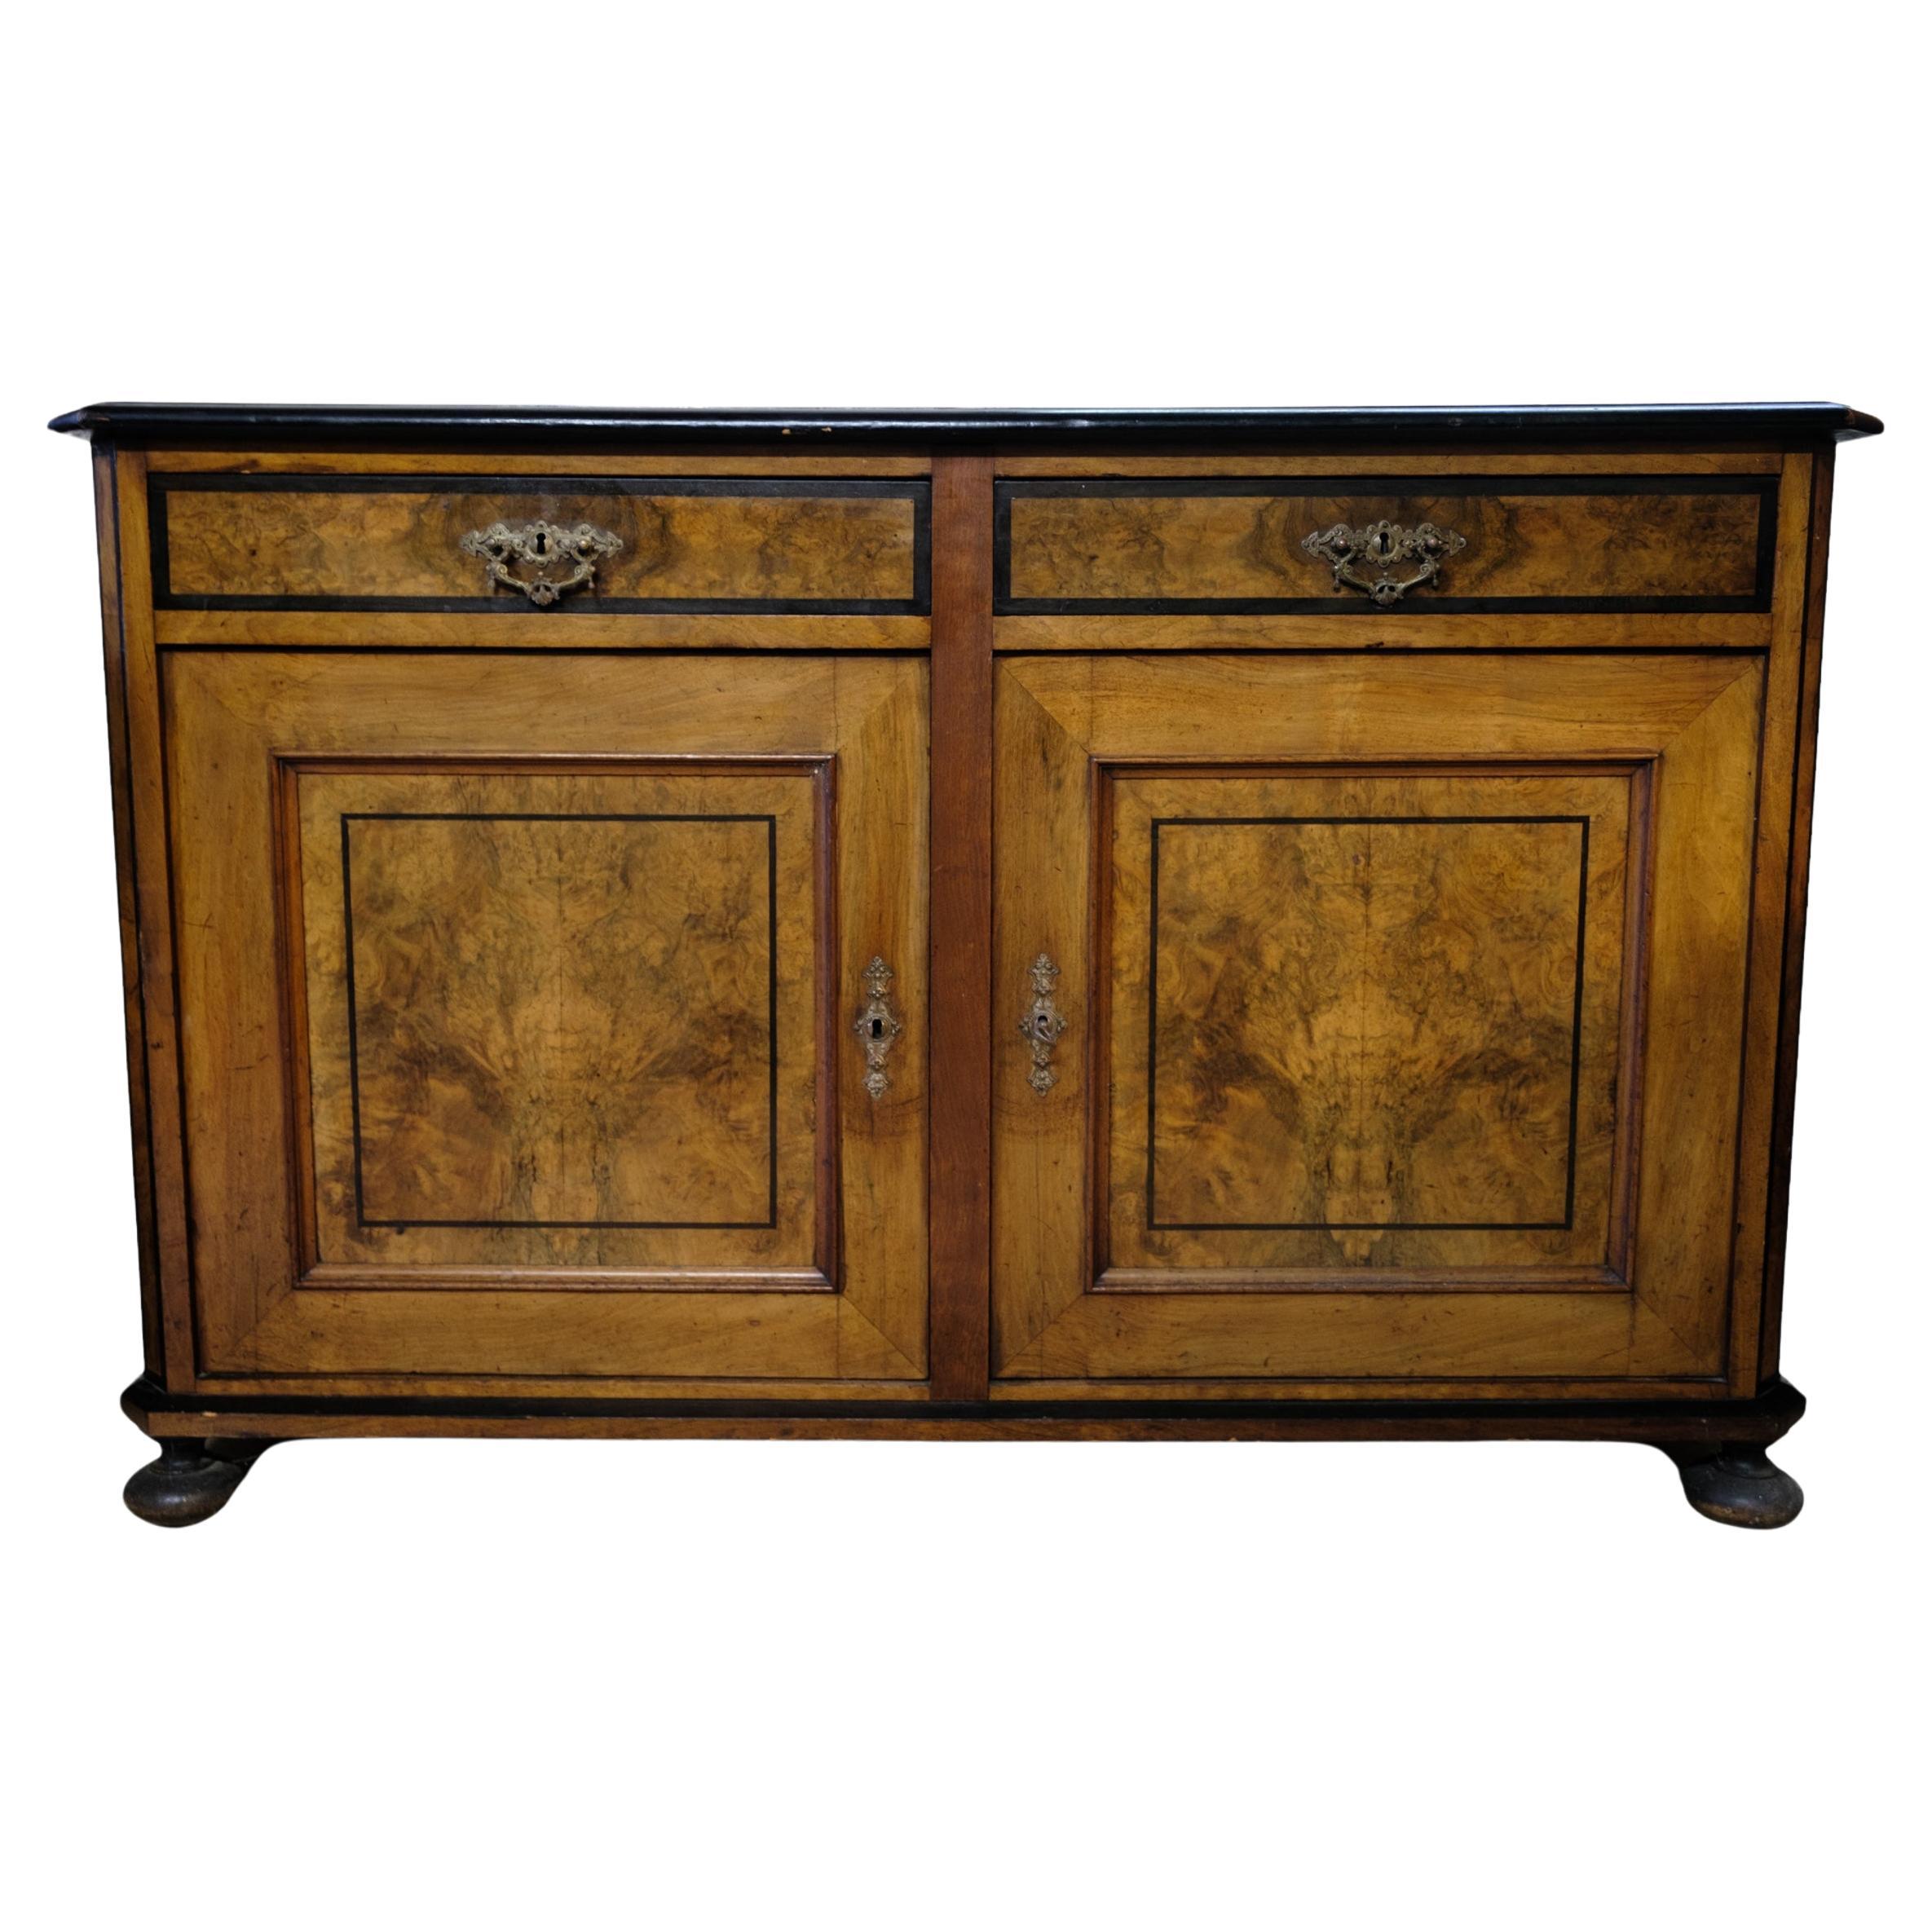 Light mahogany sideboard with round legs from around the 1920s.